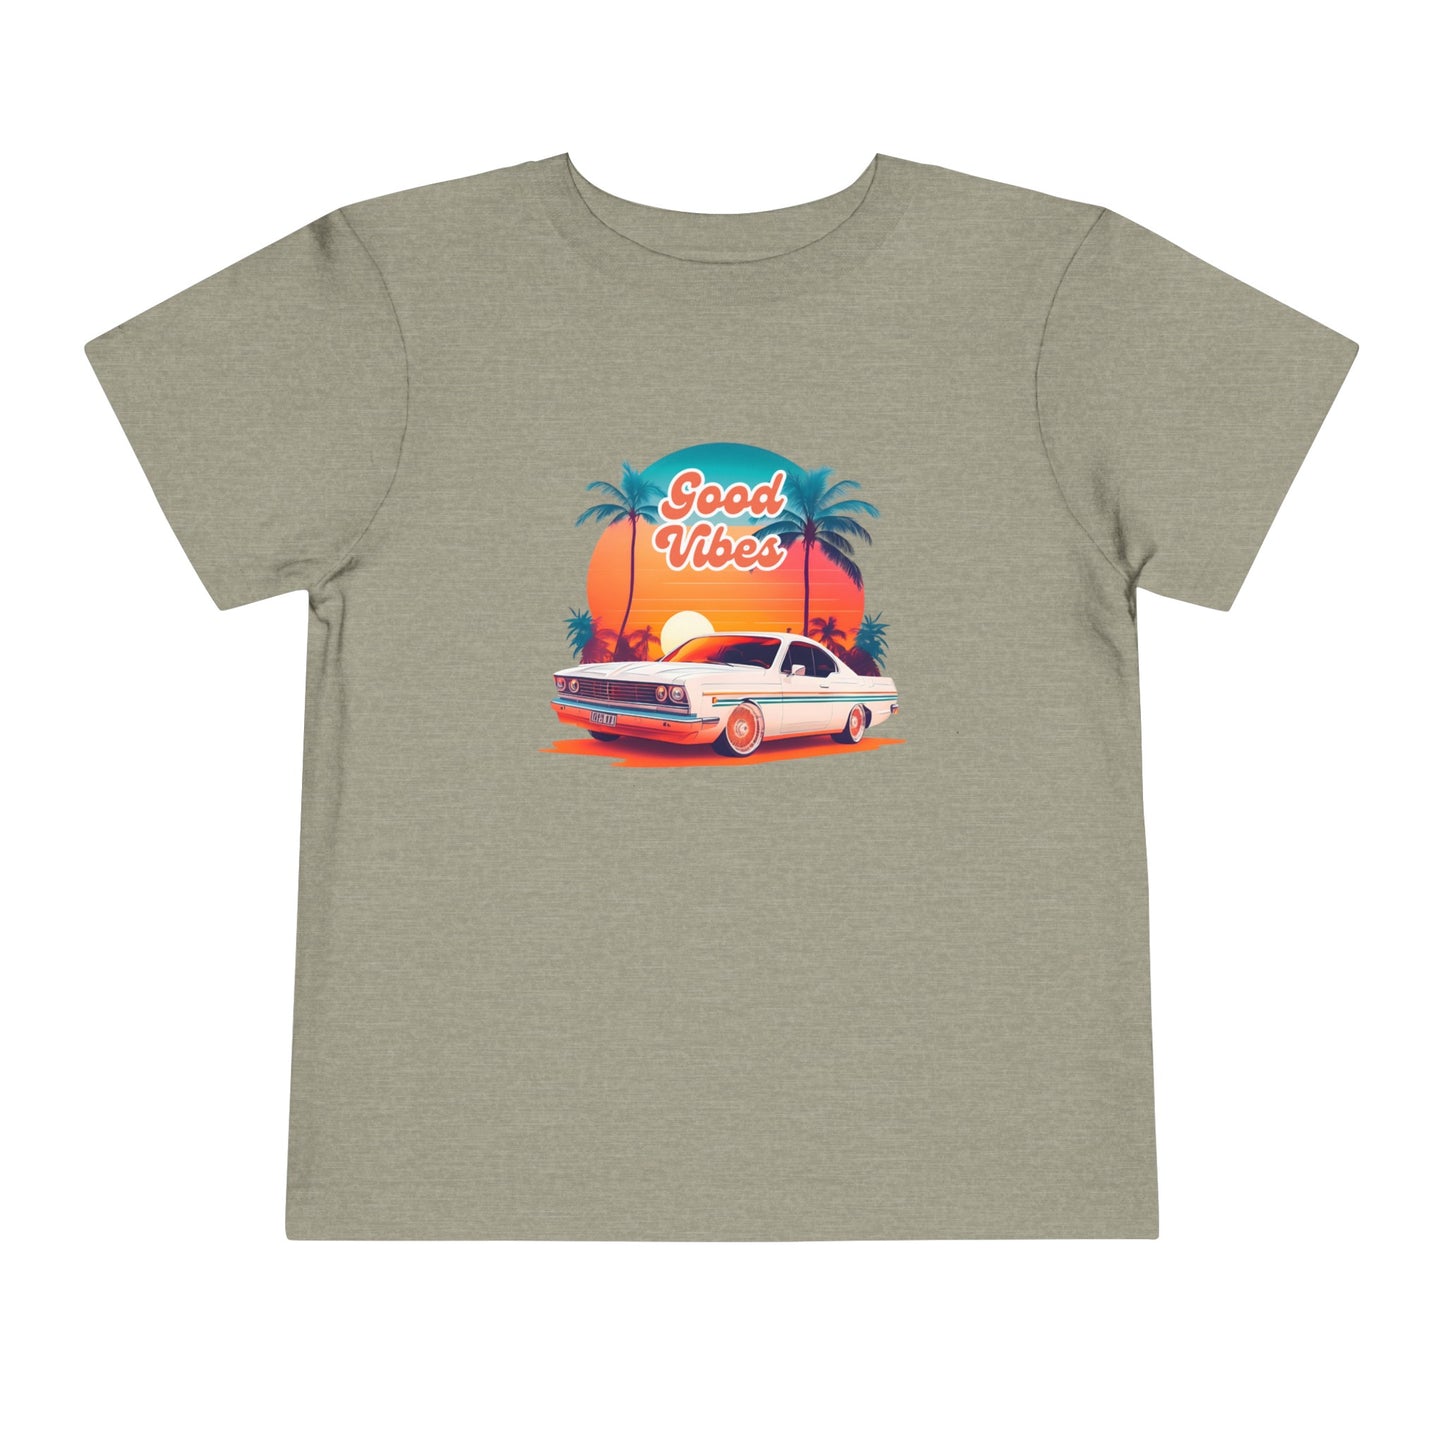 Good Vibes Toddler Heather Tee - Soft Airlume Cotton, Comfortable & Stylish